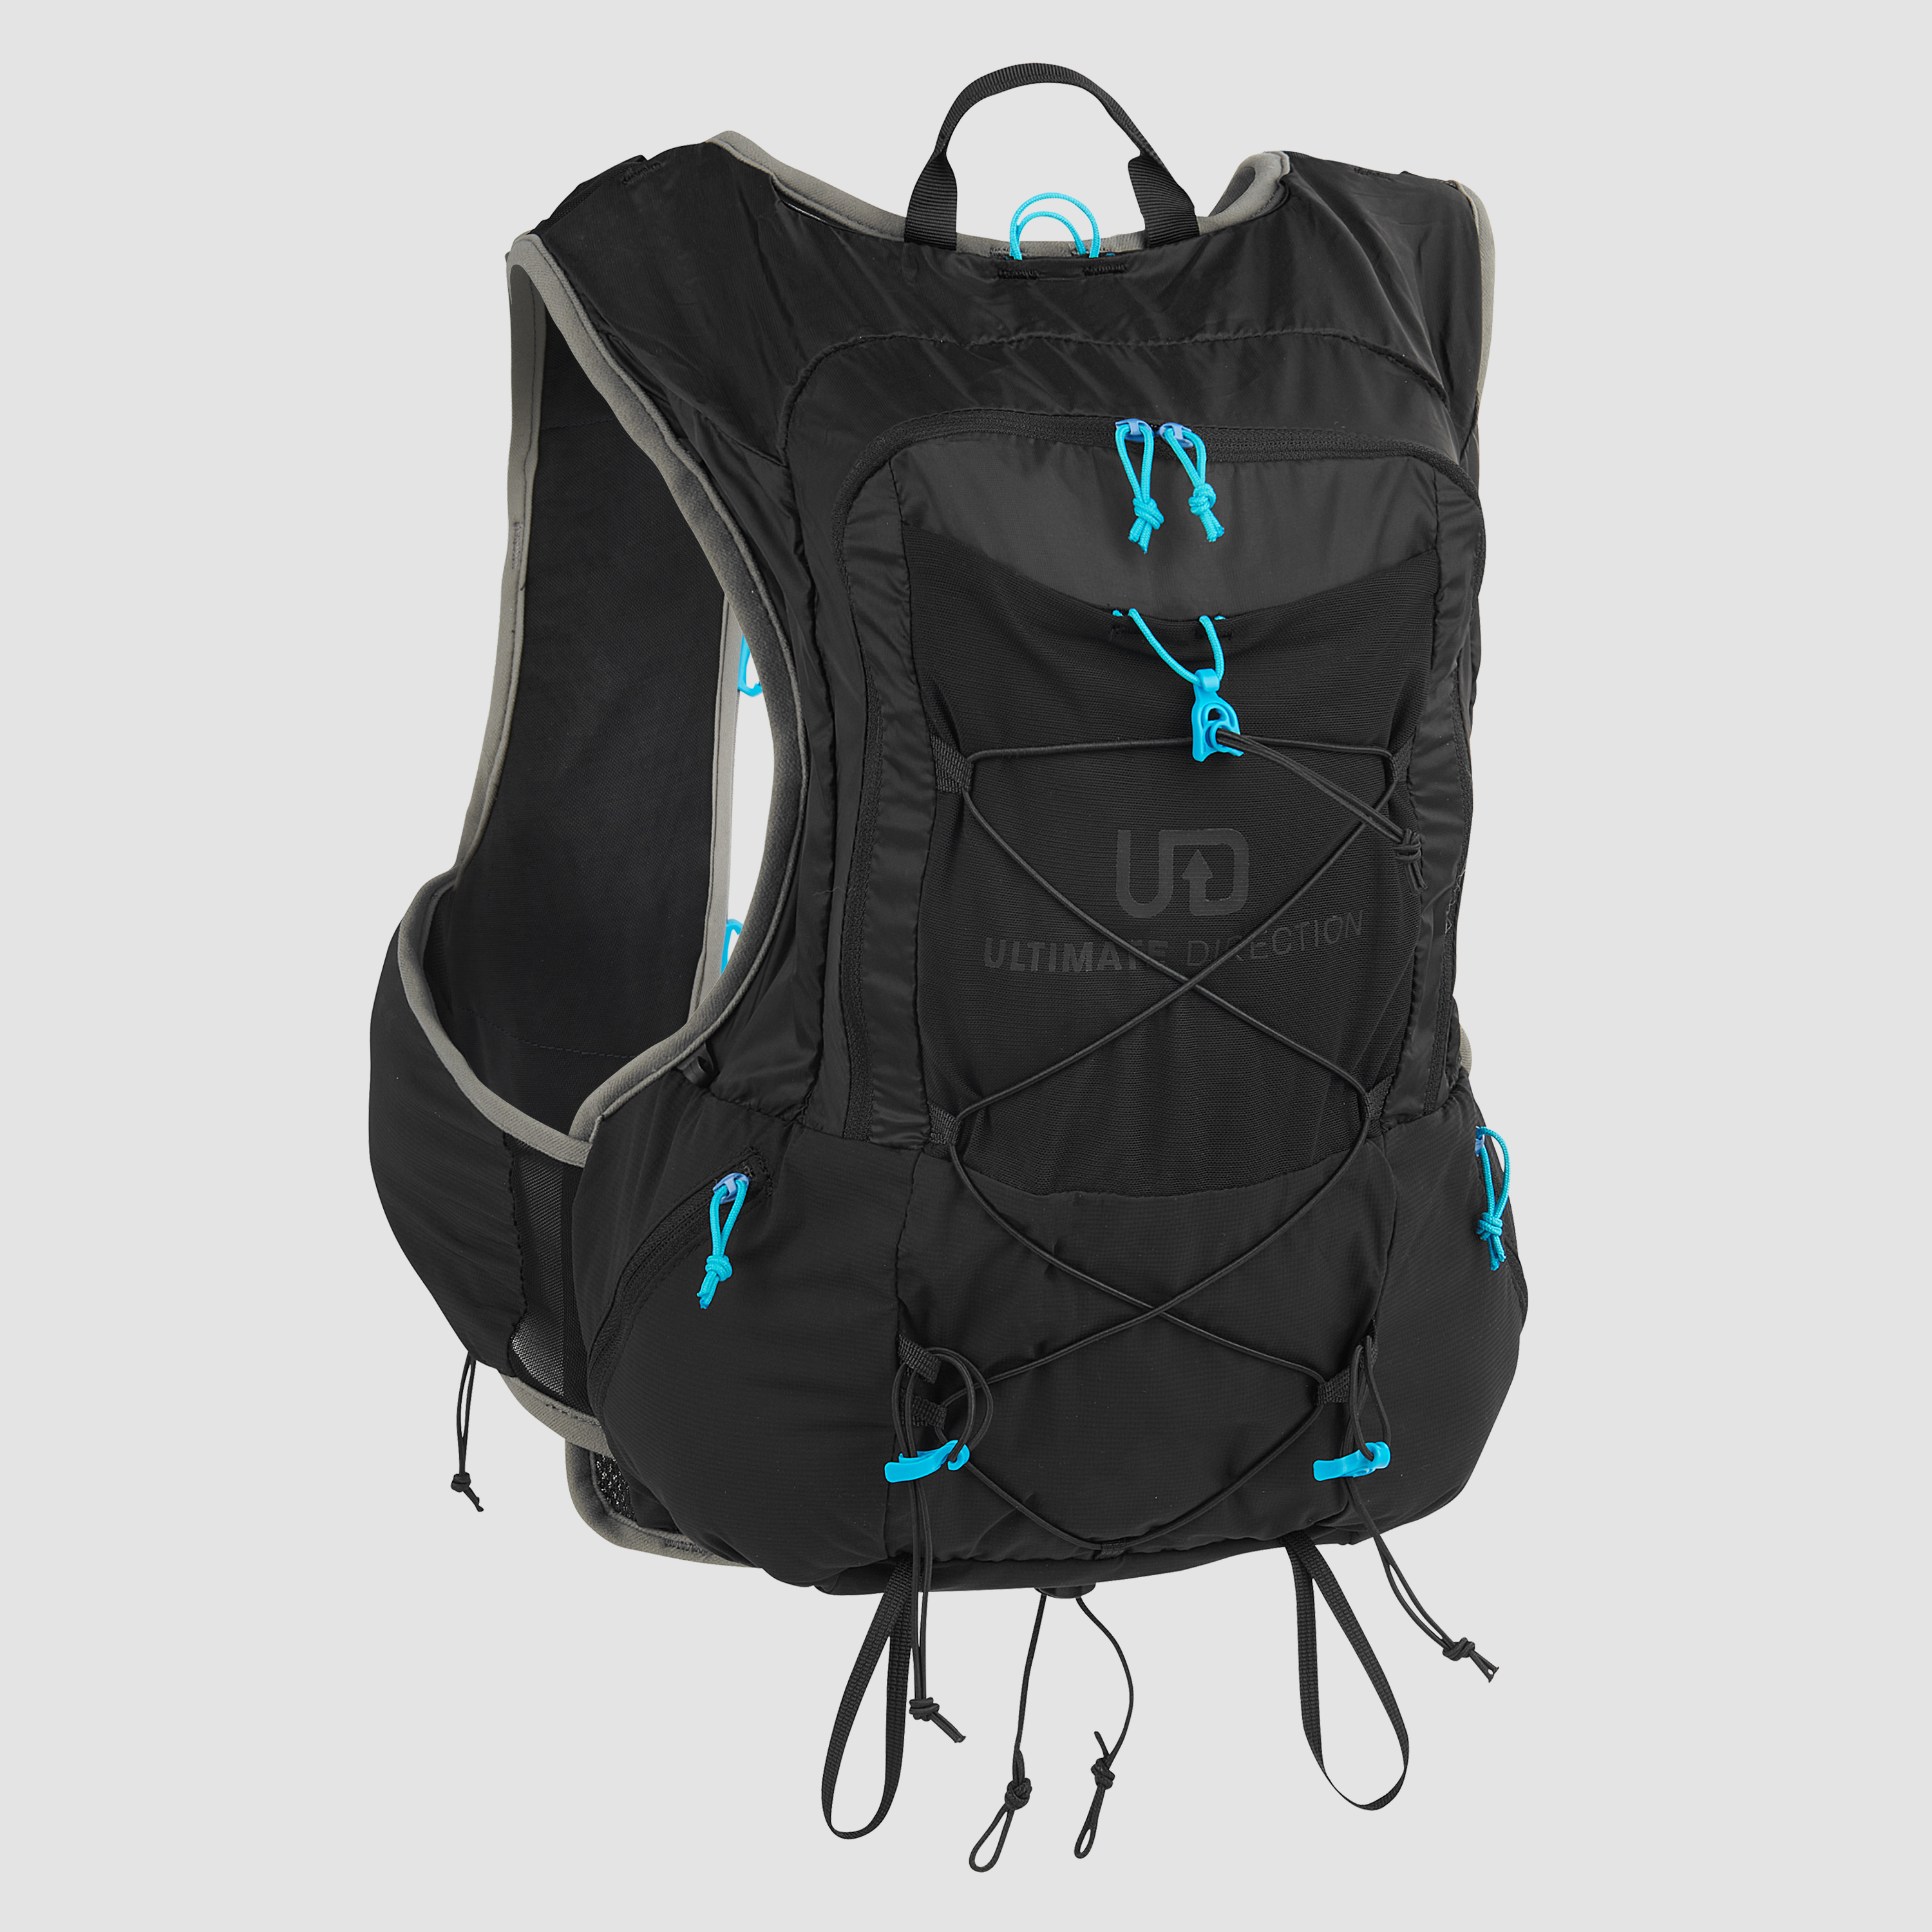 Ultimate Direction Mountain Vest 6.0 in Onyx Size Medium